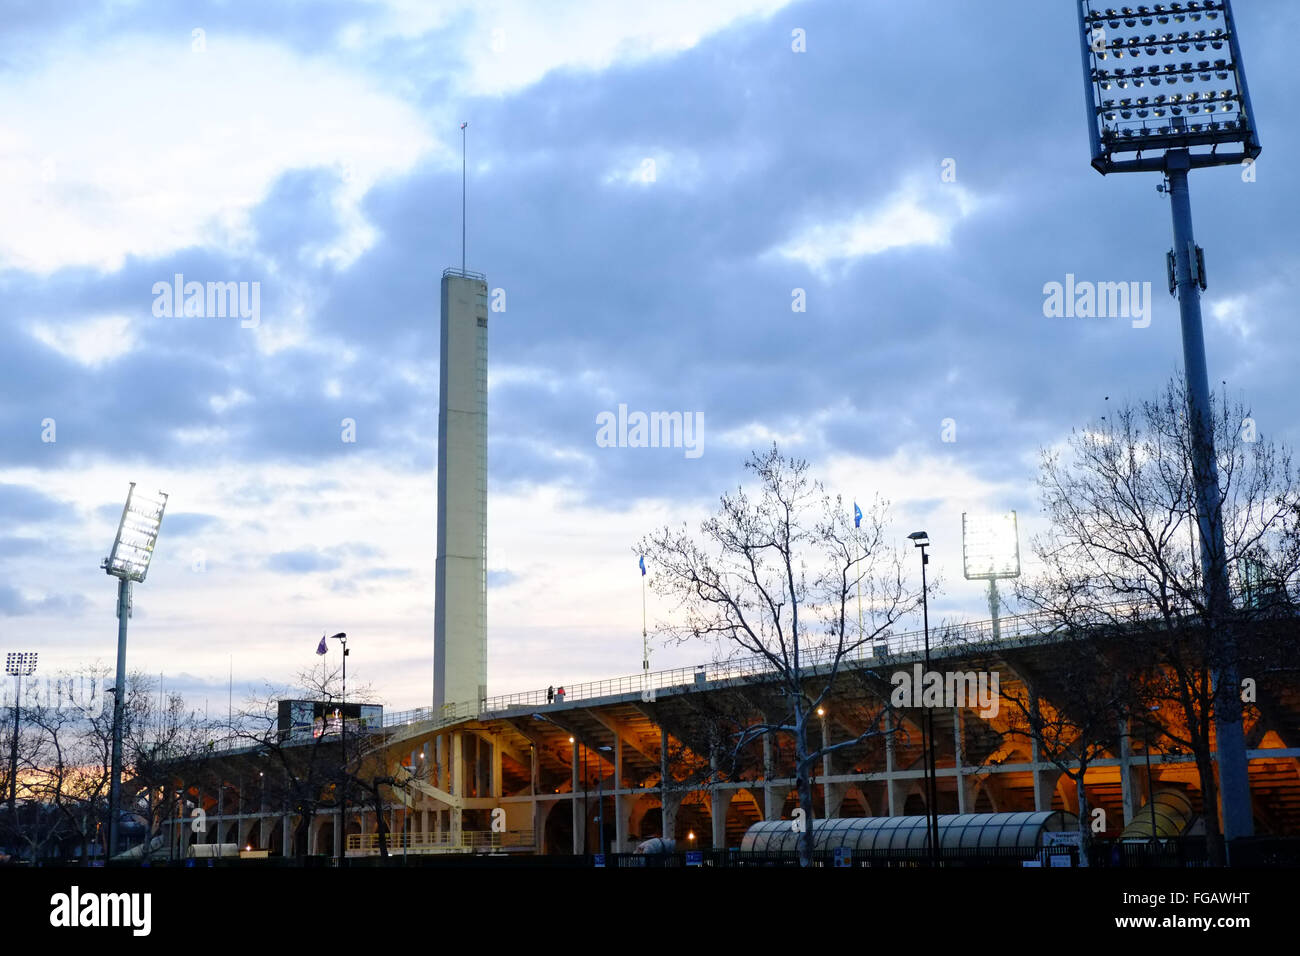 Outside view of the home team stadium, Artemio Franchi, Florence, Italy which hosts Fiorentina 's Europa League match Stock Photo